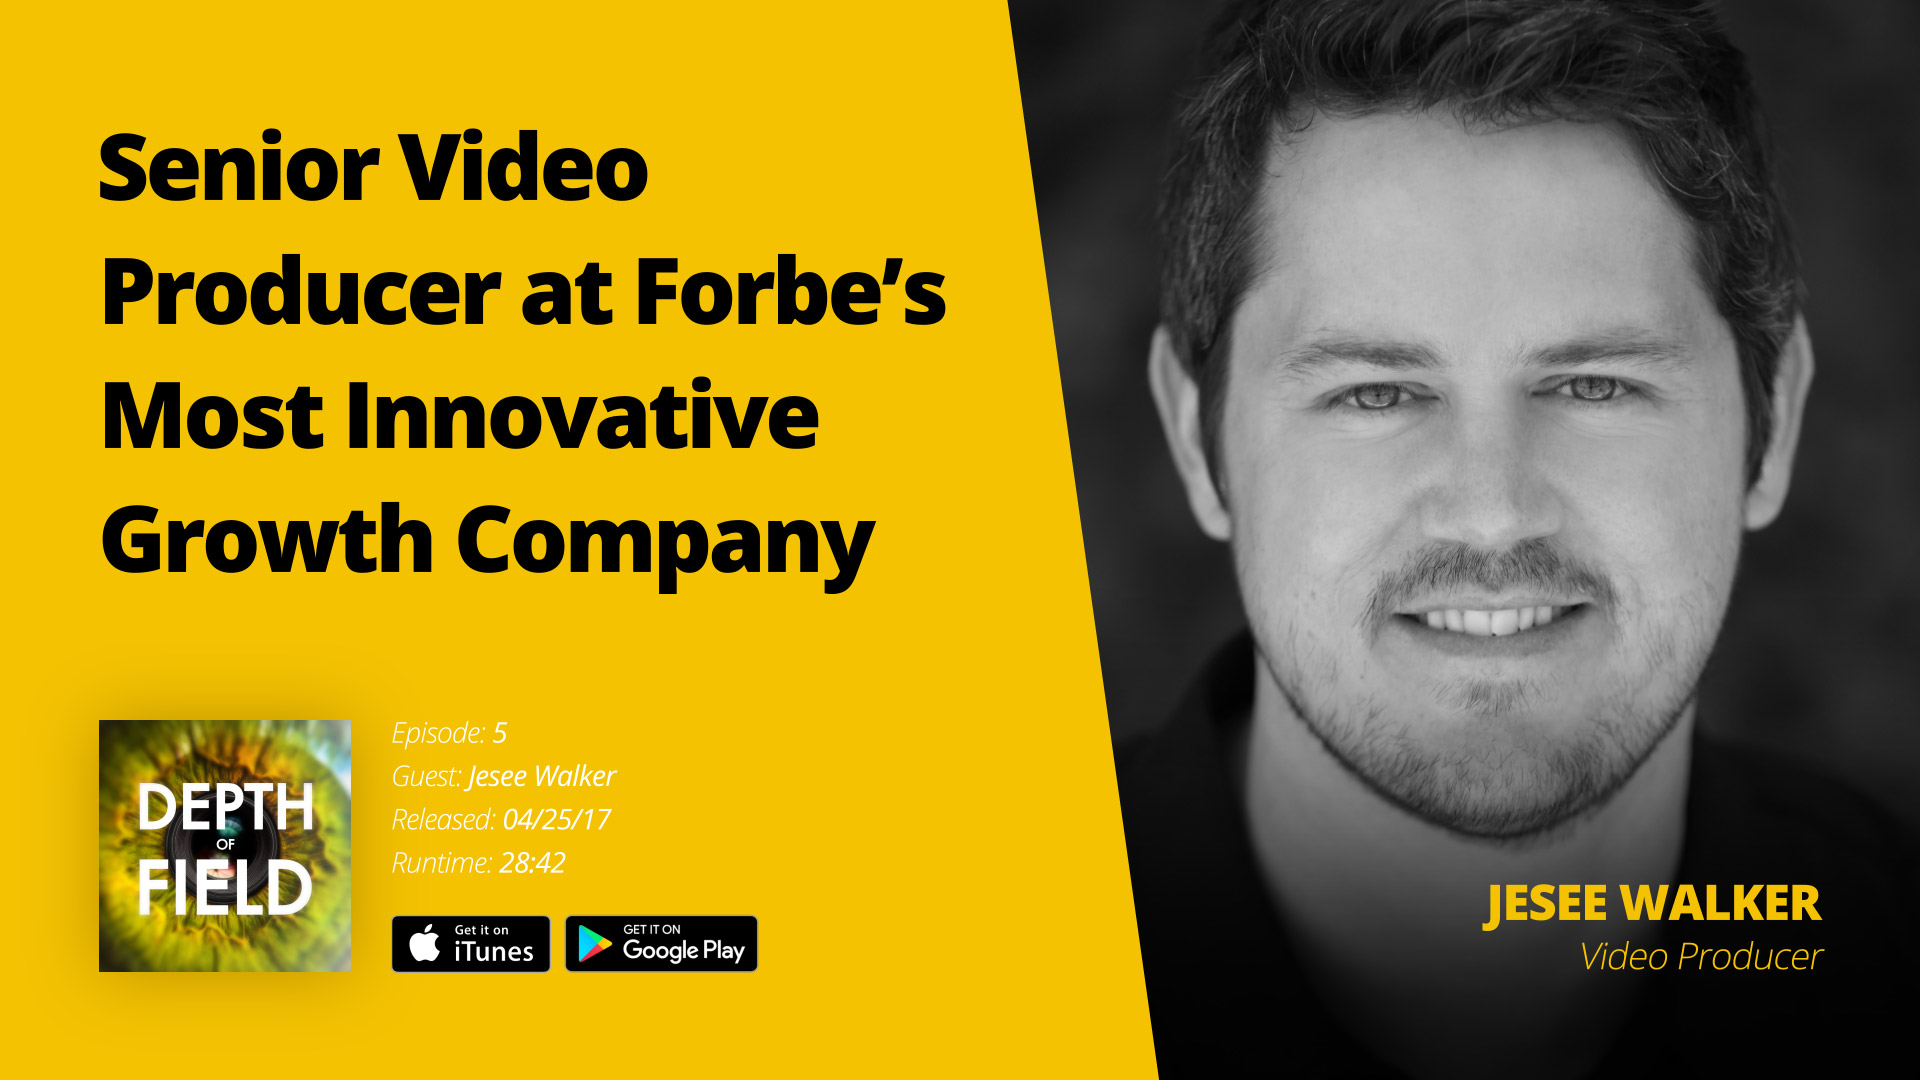 Meet the Senior Video Producer at Forbe’s Most Innovative Growth Company